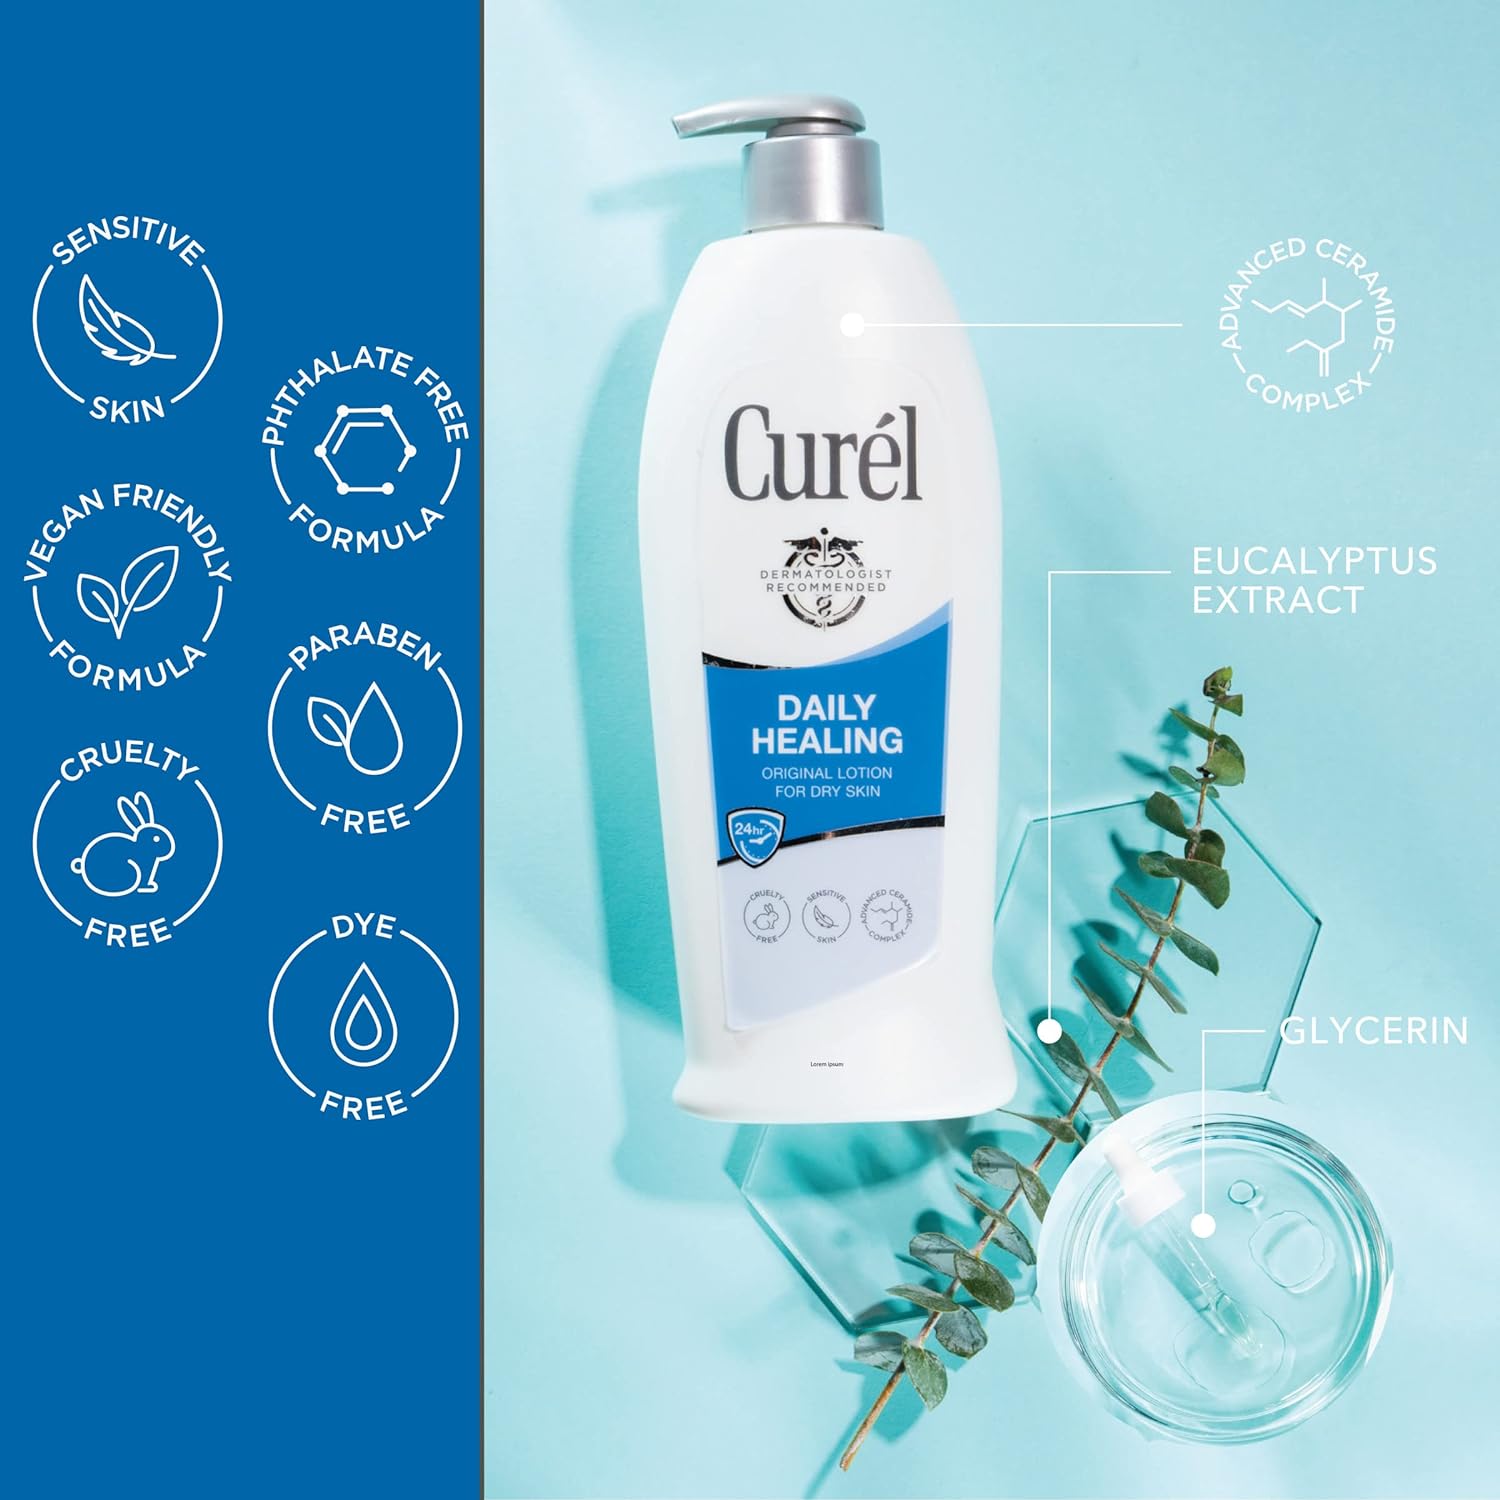 Curel Daily Healing Hand and Body Lotion, Moisturizer Nourishes Dry Skin with Advanced Ceramide Complex, Repairs Moisture Barrier, 13 Fl Ounces : Therapeutic Skin Care Lotions And Creams : Beauty & Personal Care